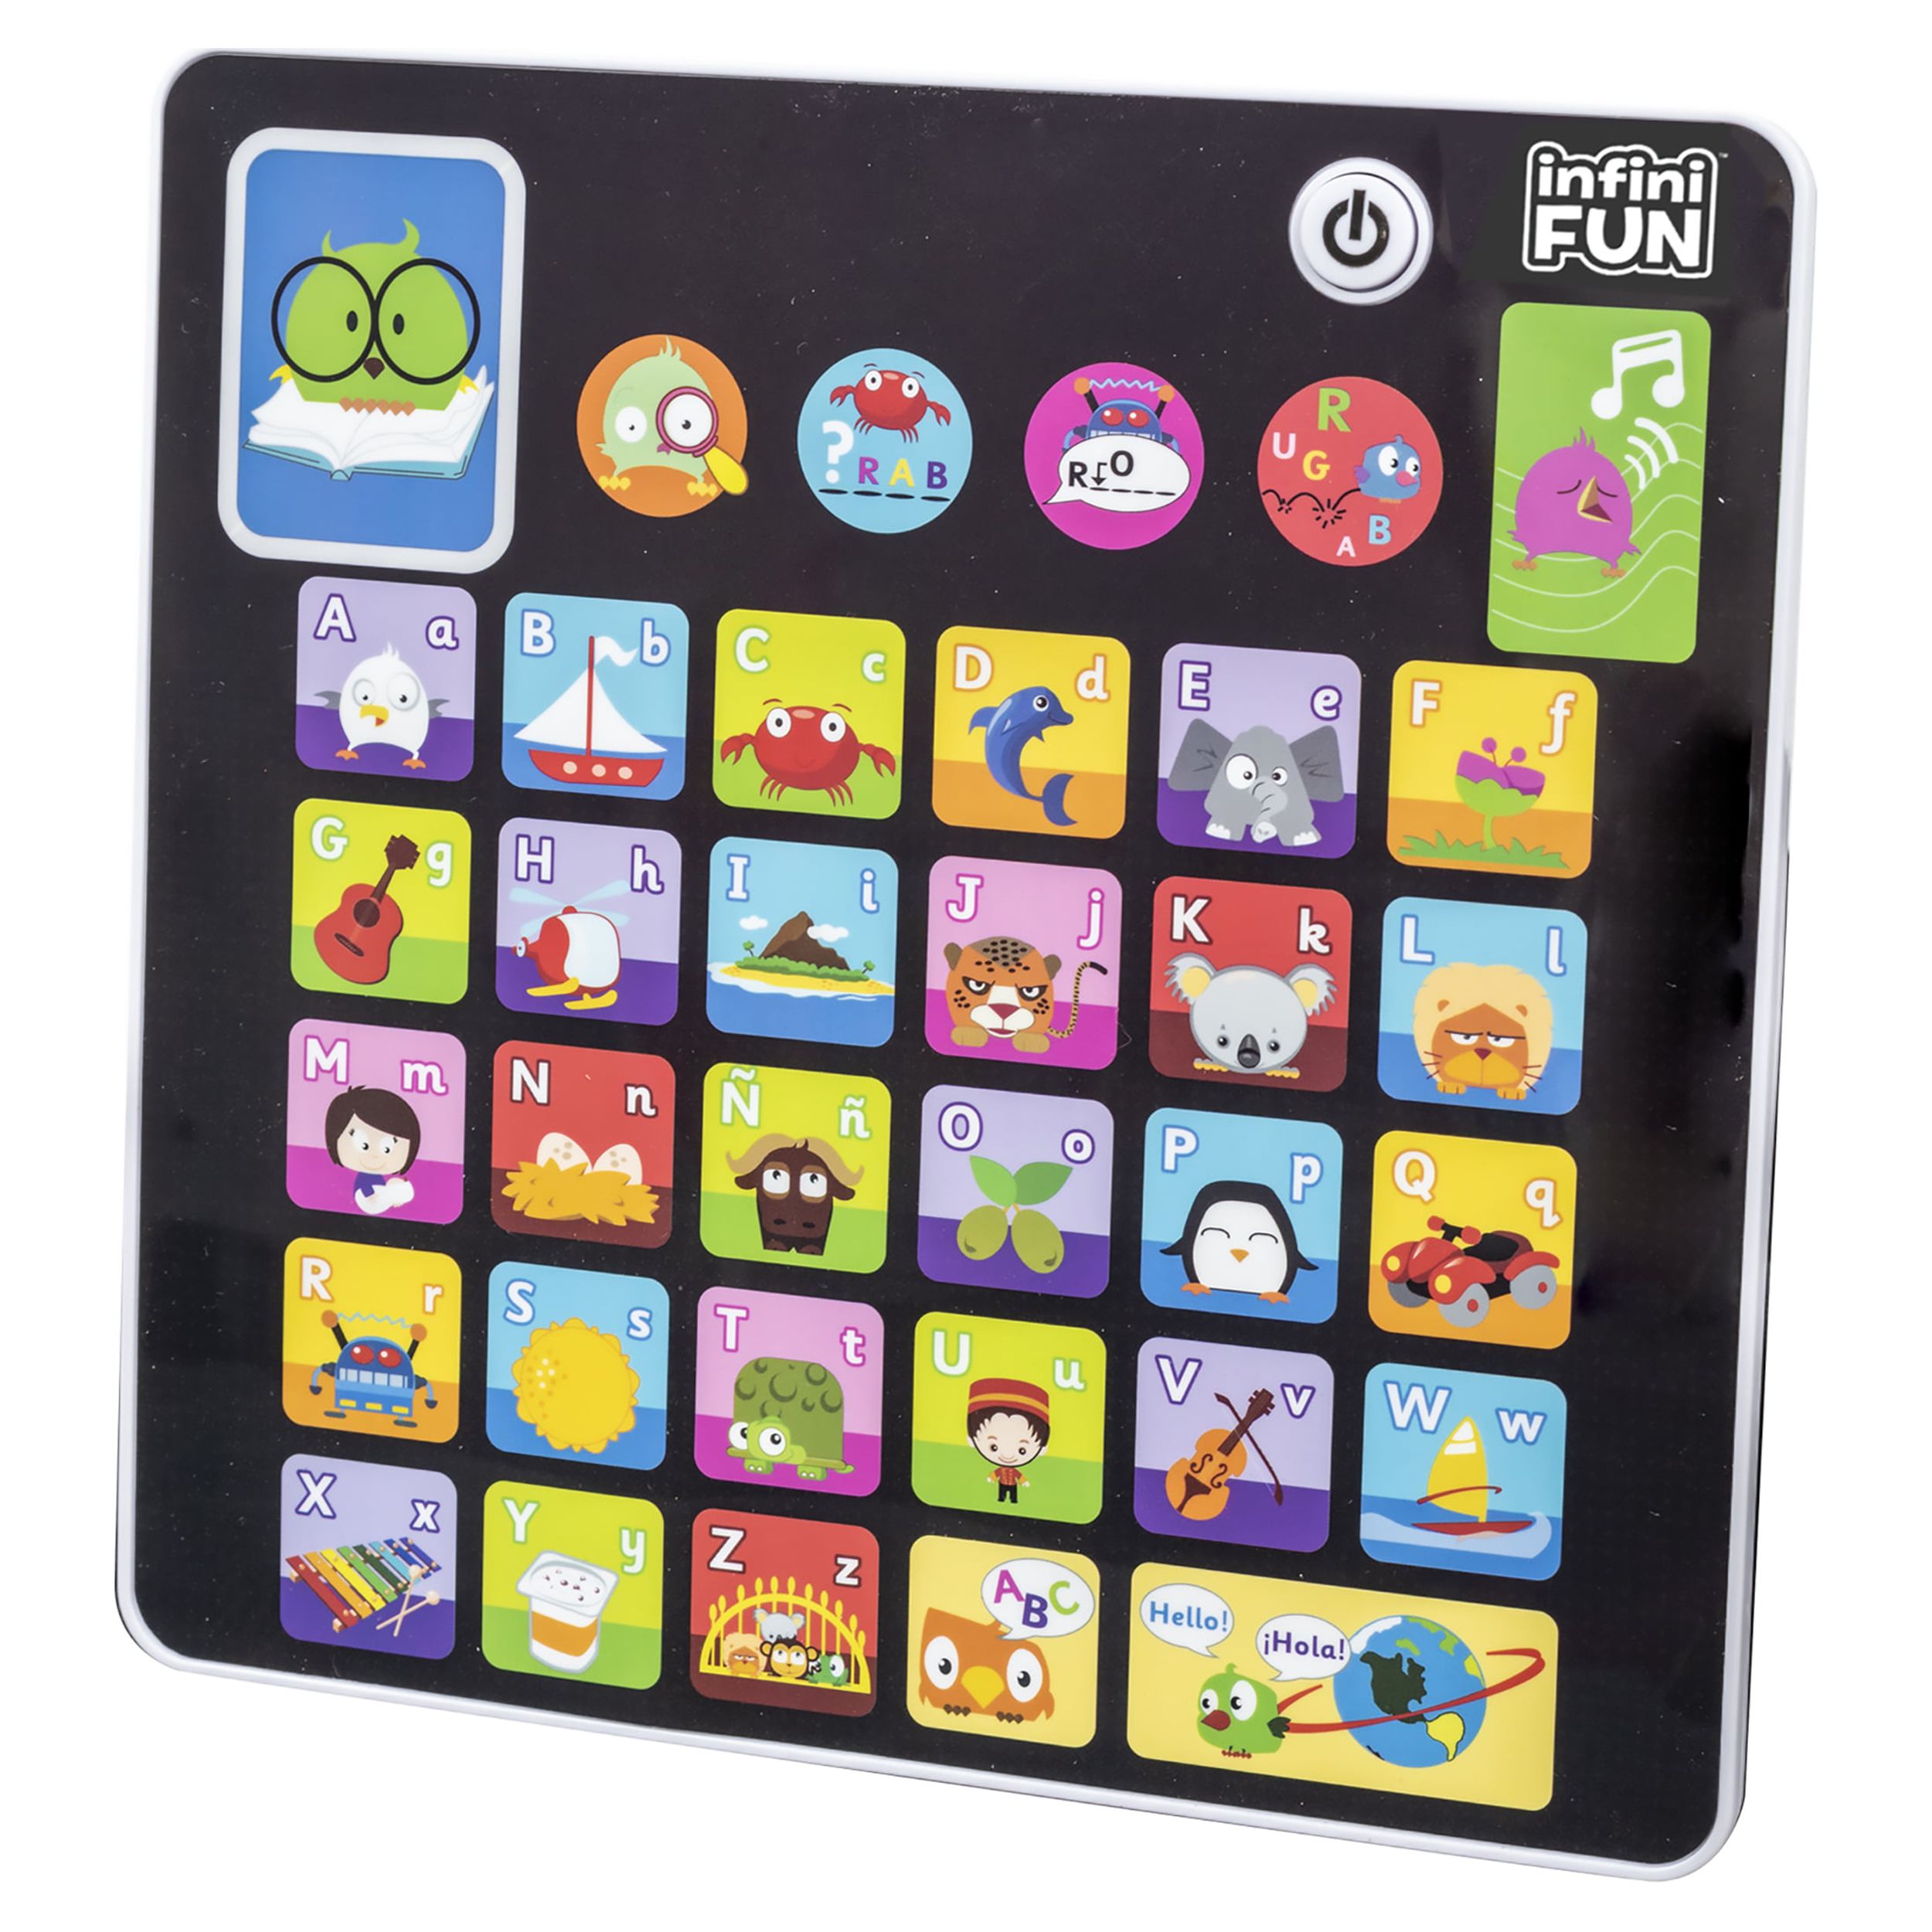 Kidz Delight Tech Too Smooth Touch Play ABC Alphabet Tablet  for Children Ages 3 Years and up - image 2 of 7